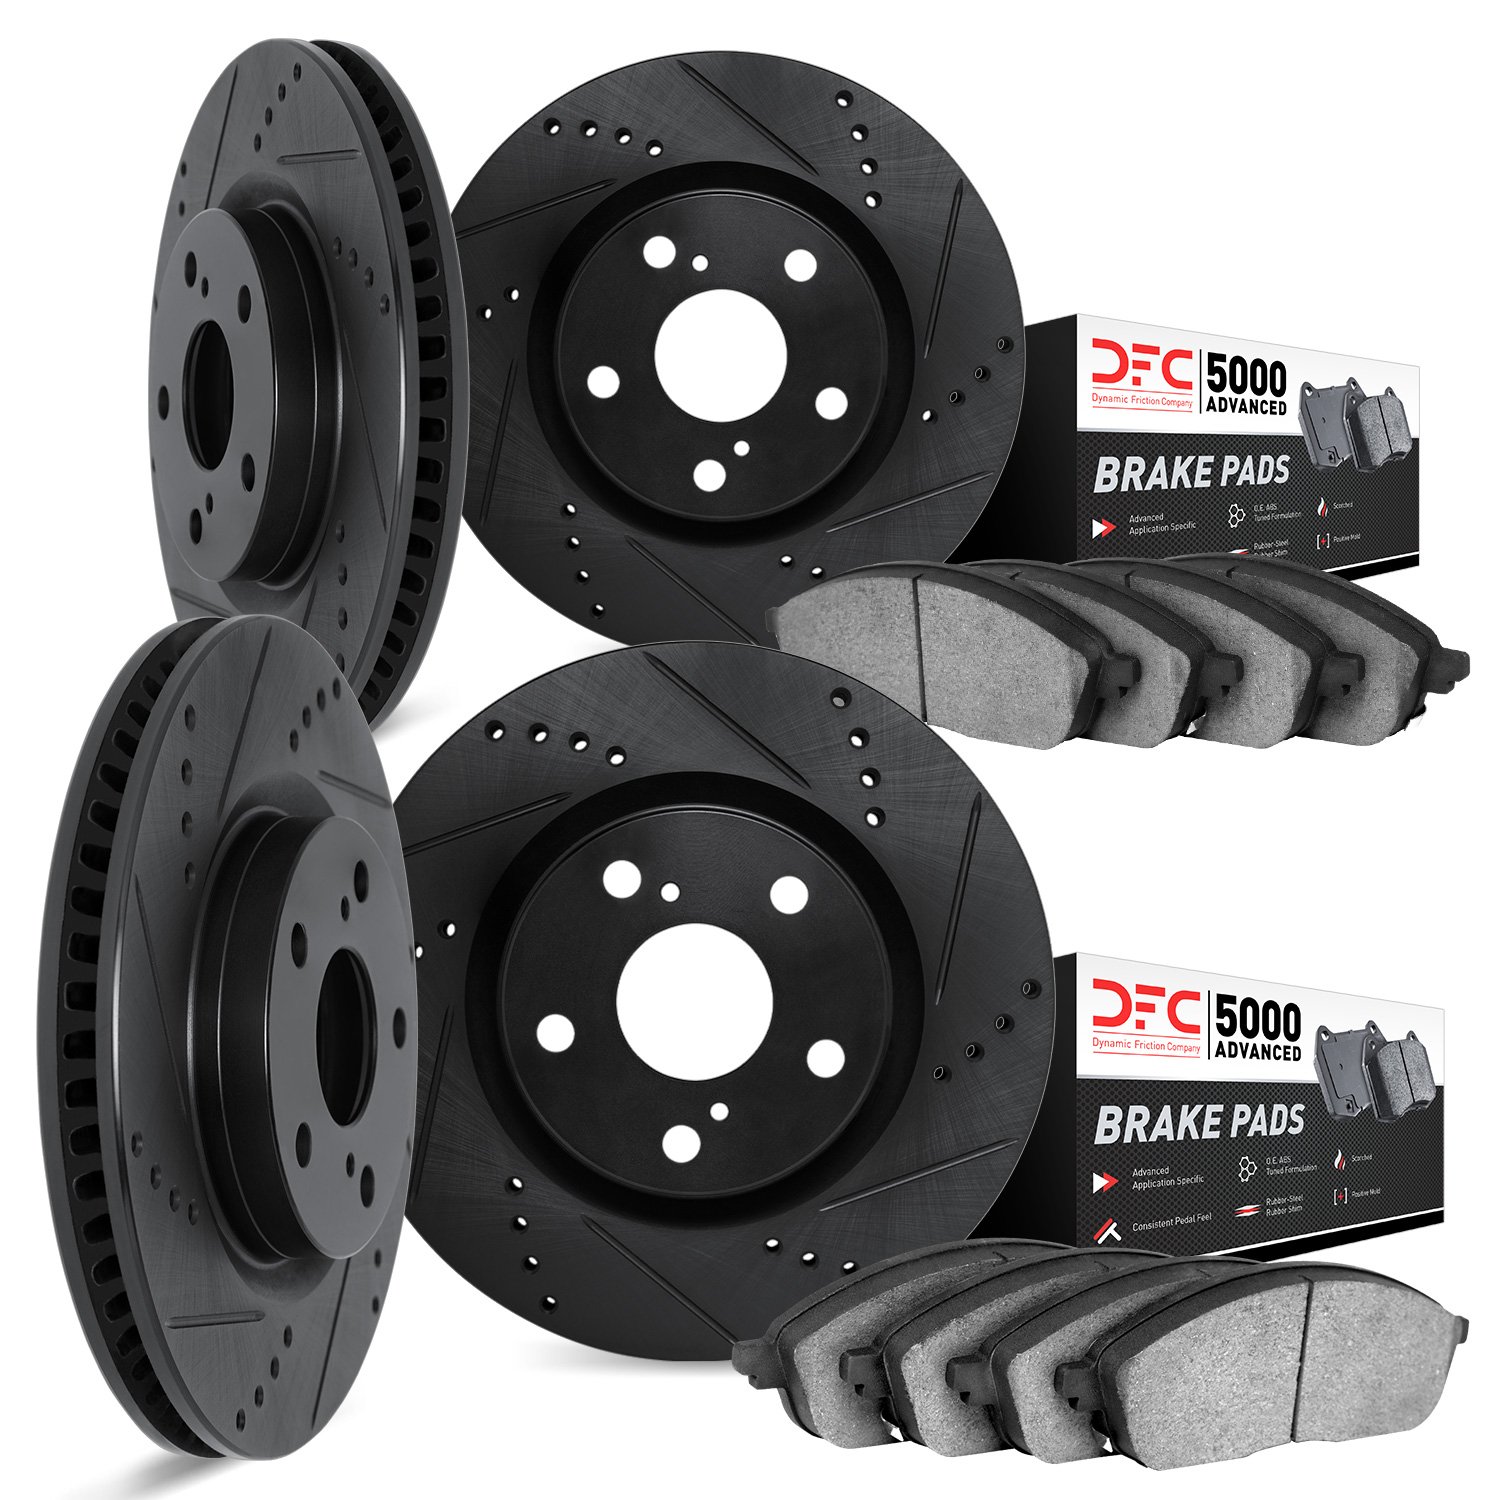 8504-76155 Drilled/Slotted Brake Rotors w/5000 Advanced Brake Pads Kit [Black], 1991-1997 Lexus/Toyota/Scion, Position: Front an